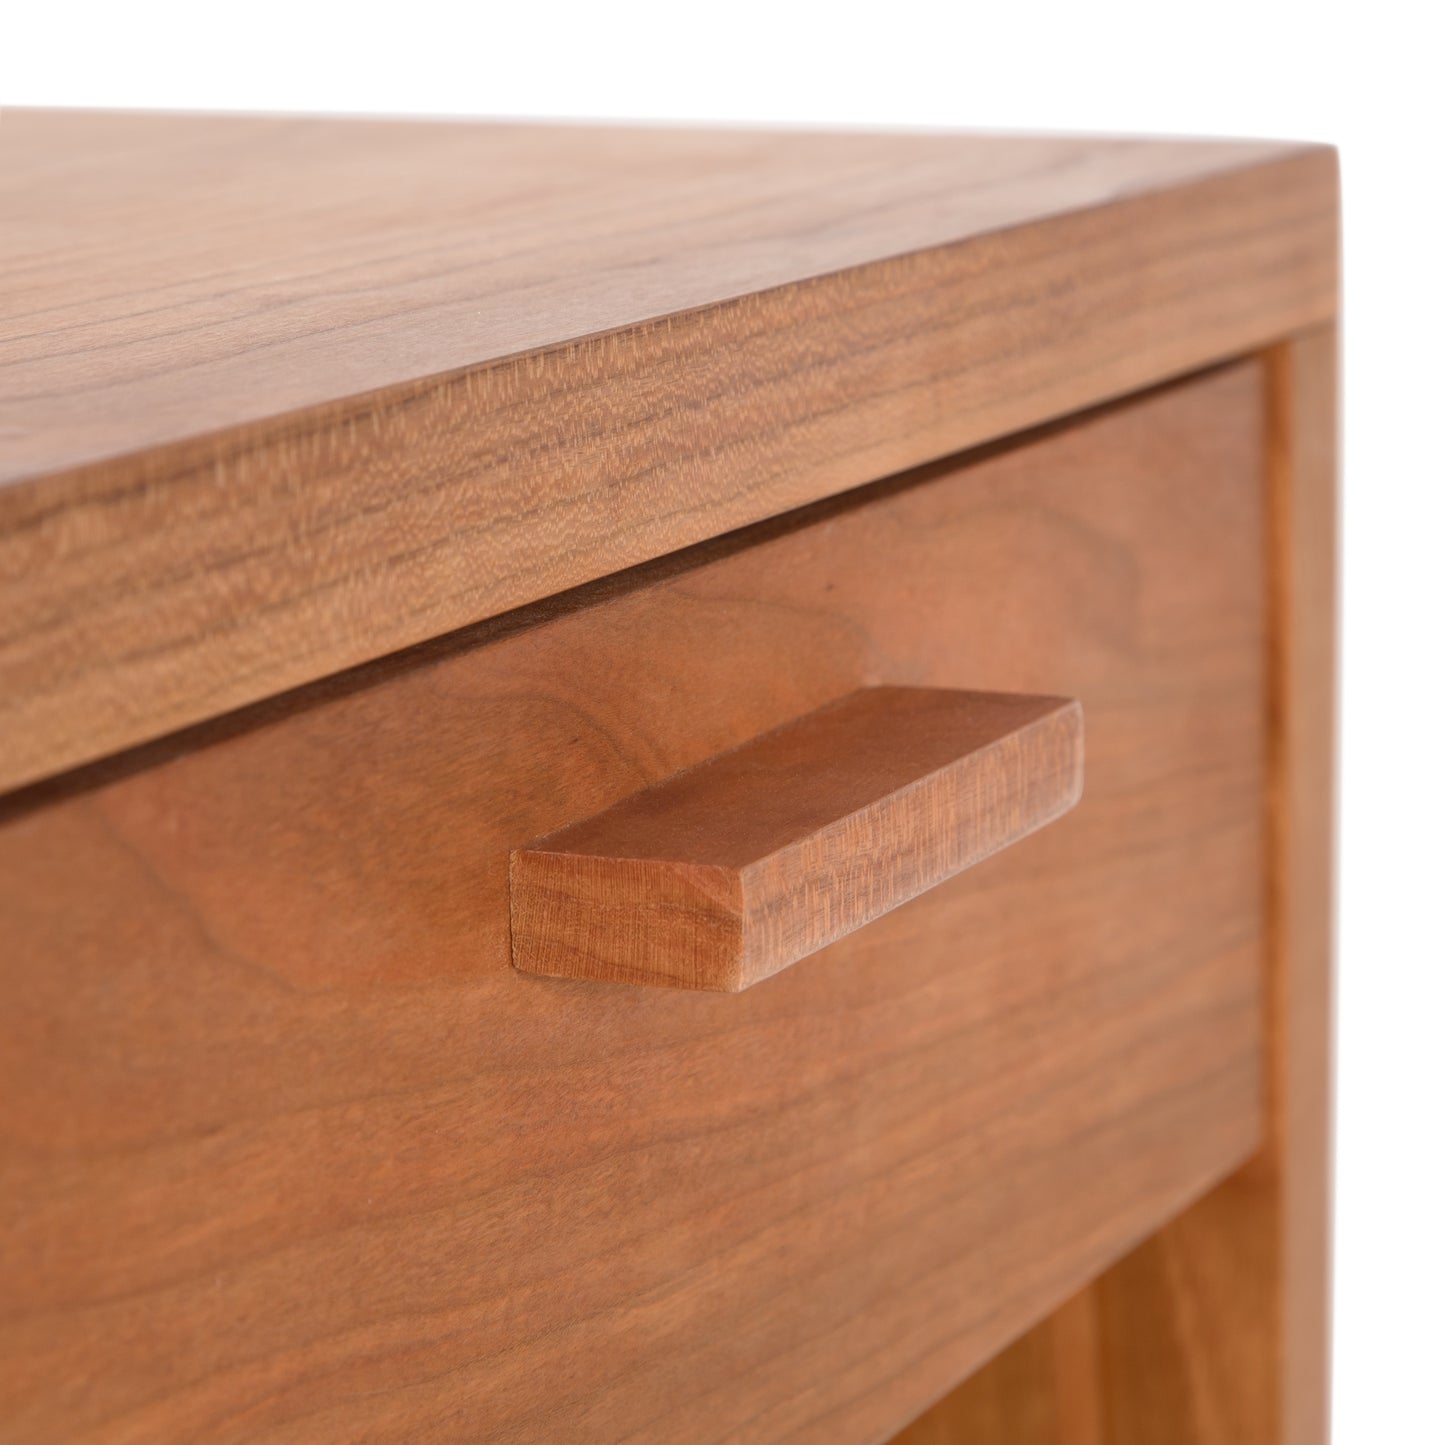 Close-up of a Vermont Furniture Designs Loft 1-Drawer Enclosed Shelf Nightstand drawer with a simple pull handle, highlighting the wood's natural grain.